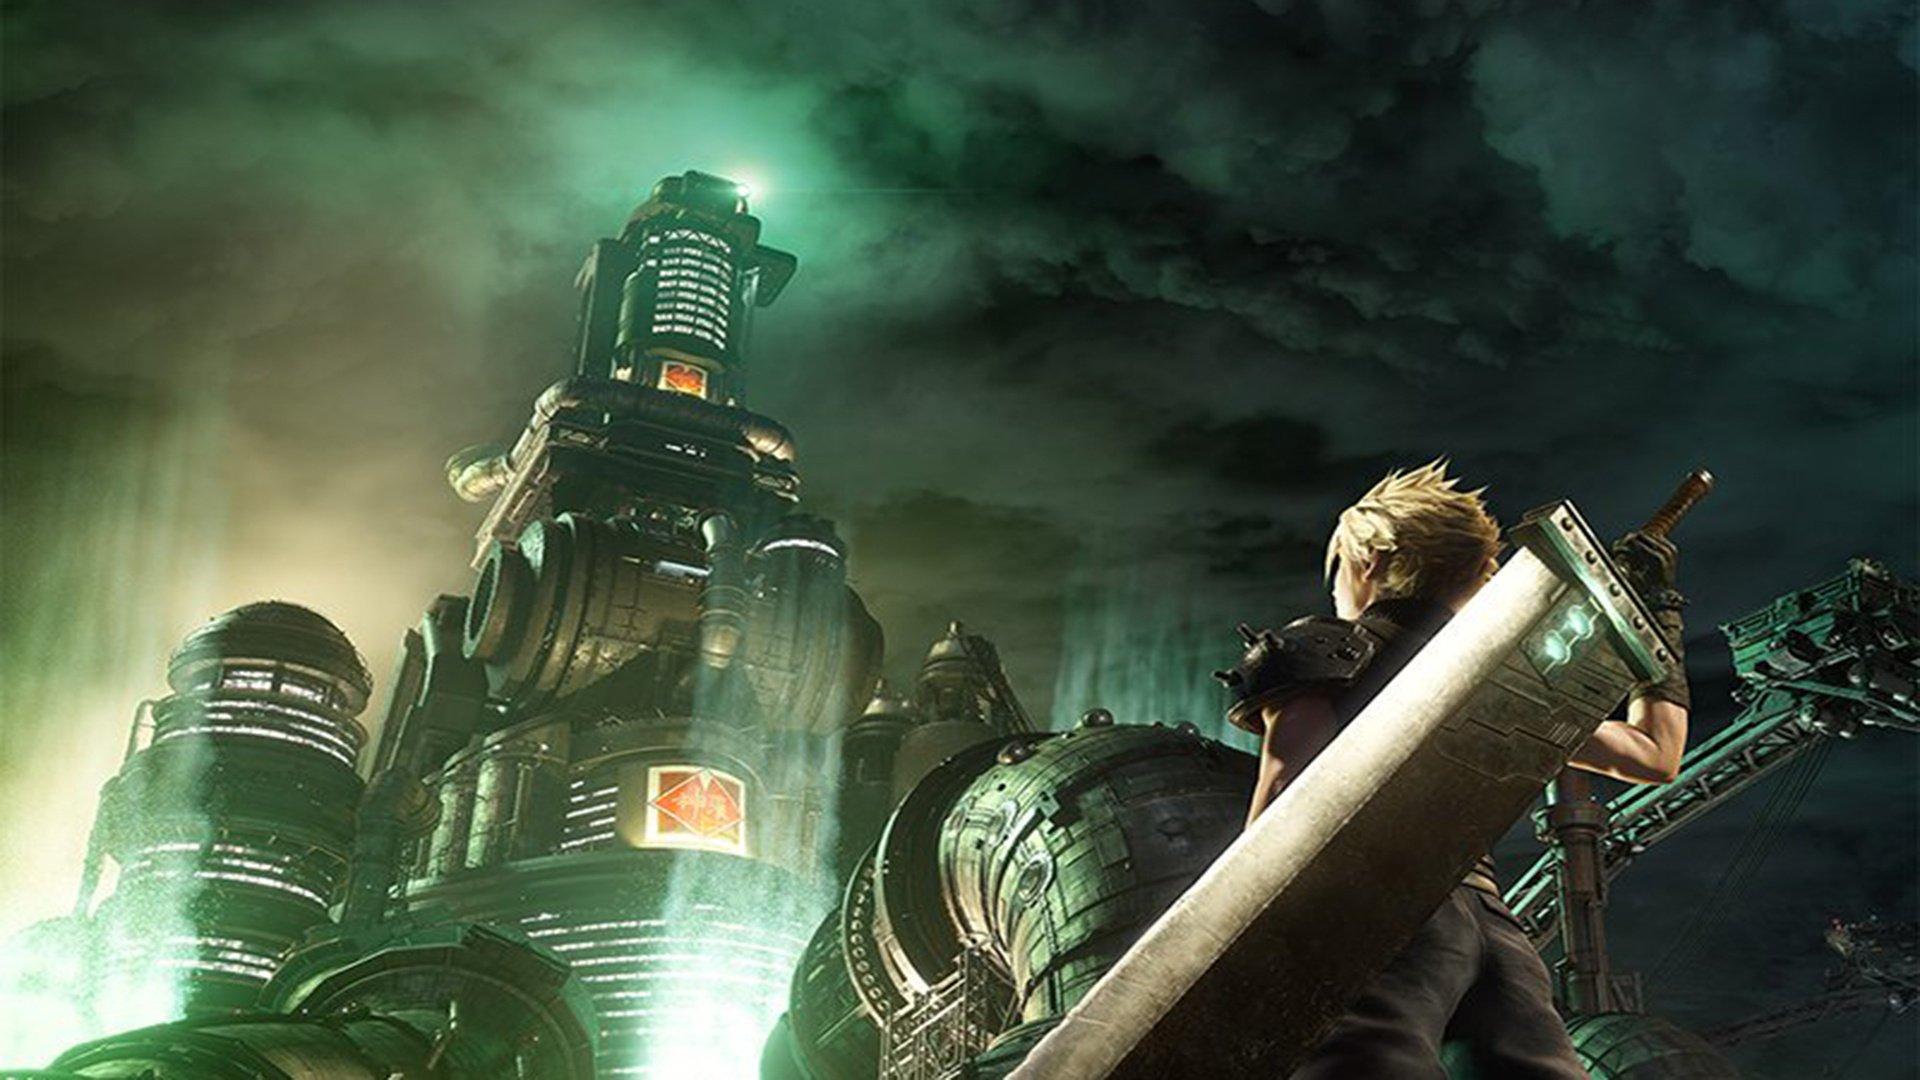 Hands On: Final Fantasy VII Remake Will Live Up to RPG's Legendary